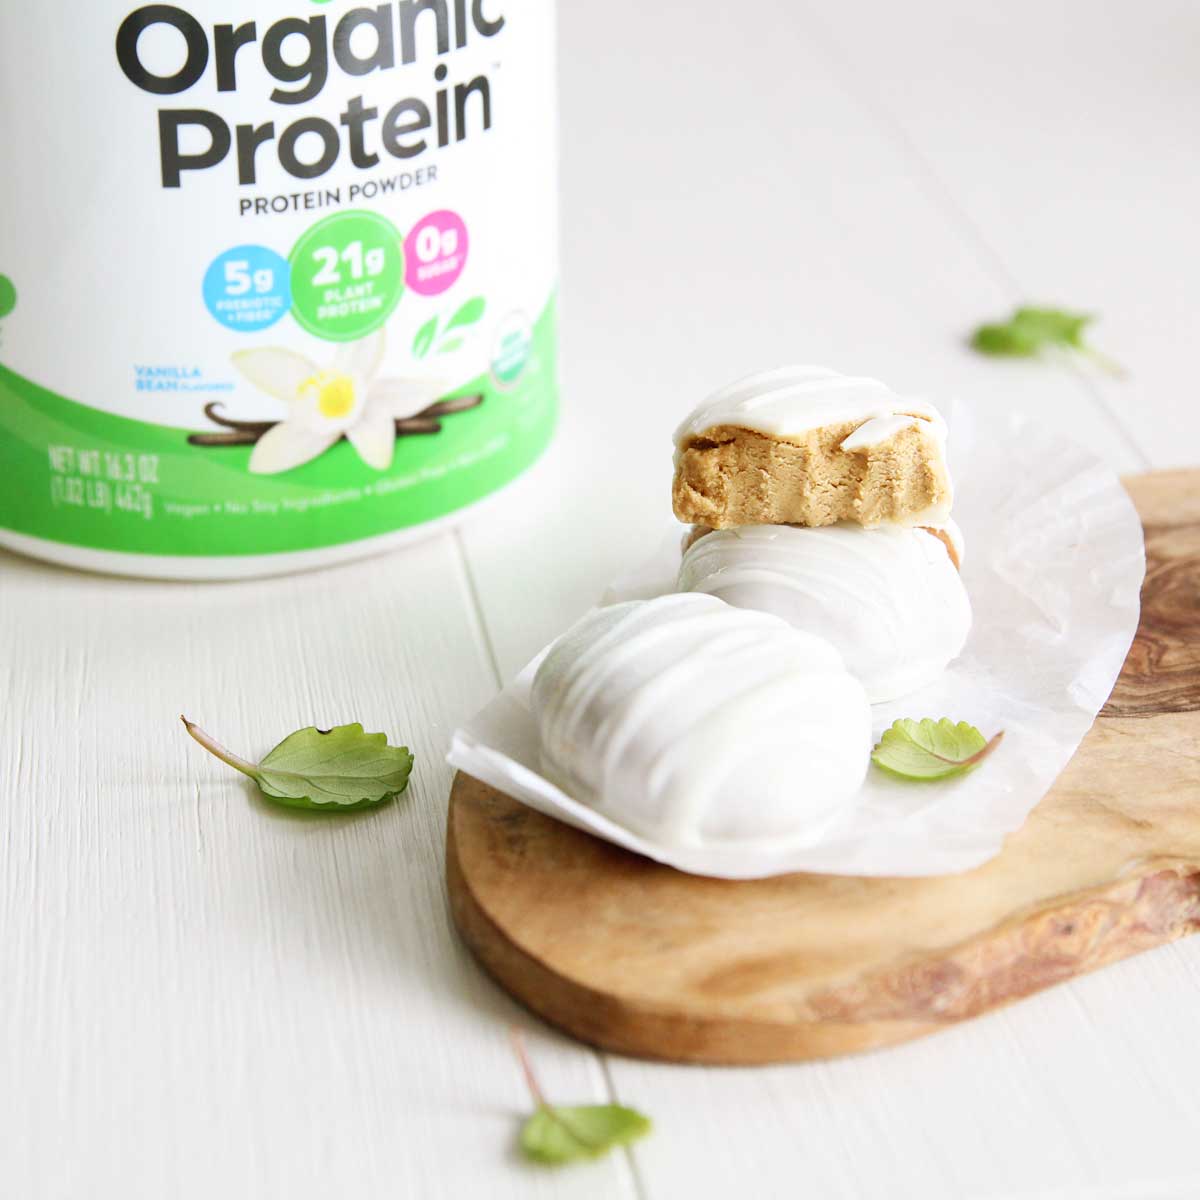 Healthy Protein Powder Easter Eggs Recipe (Just 3 ingredients!) - sweet potato mochi